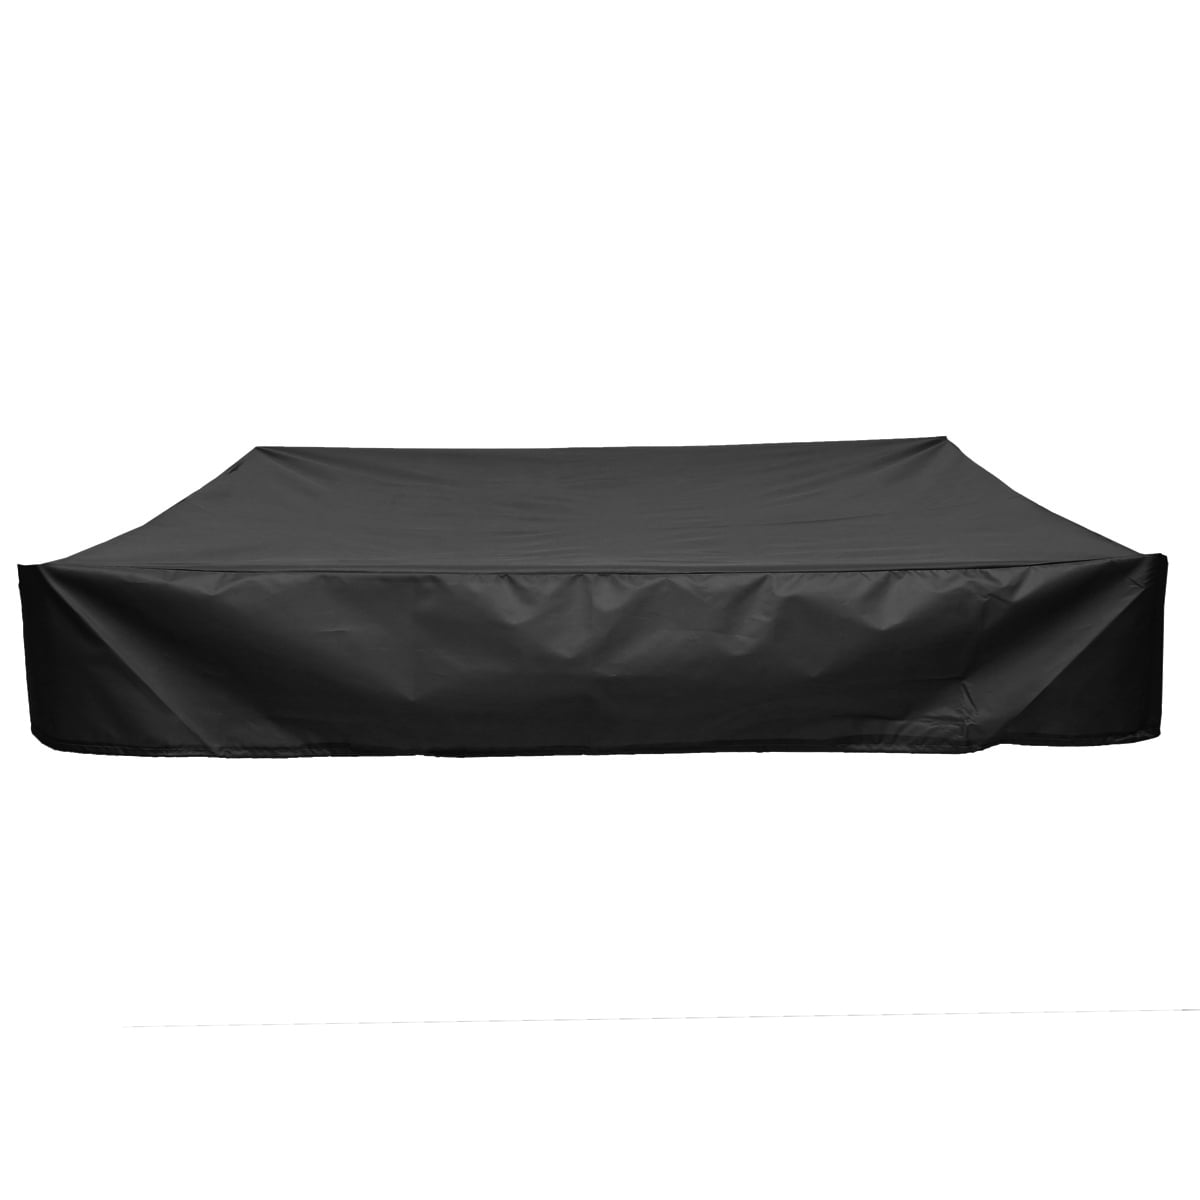 BWWNBY Sandbox Cover Square Dustproof Protection Sandbox Canopy with Drawstring Green,Size:120x120 Oxford Cloth Water Resistance Sand Pool Cover